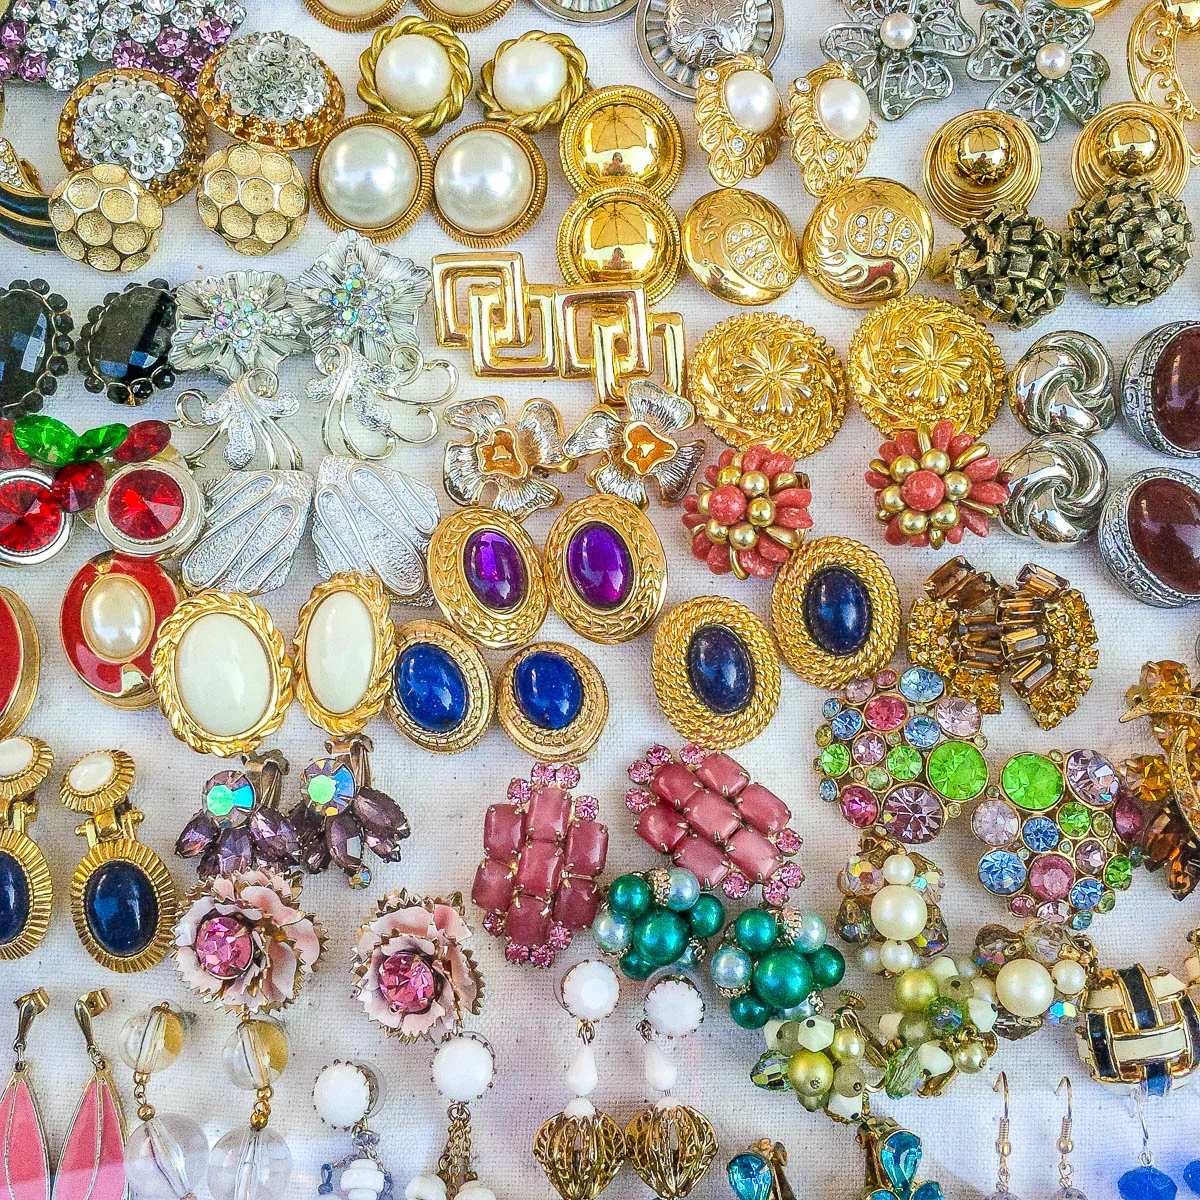 Vintage earrings - Non Ho L'Eta Antiques and Vintage Market - Vicenza, Italy - www.rossiwrites.com